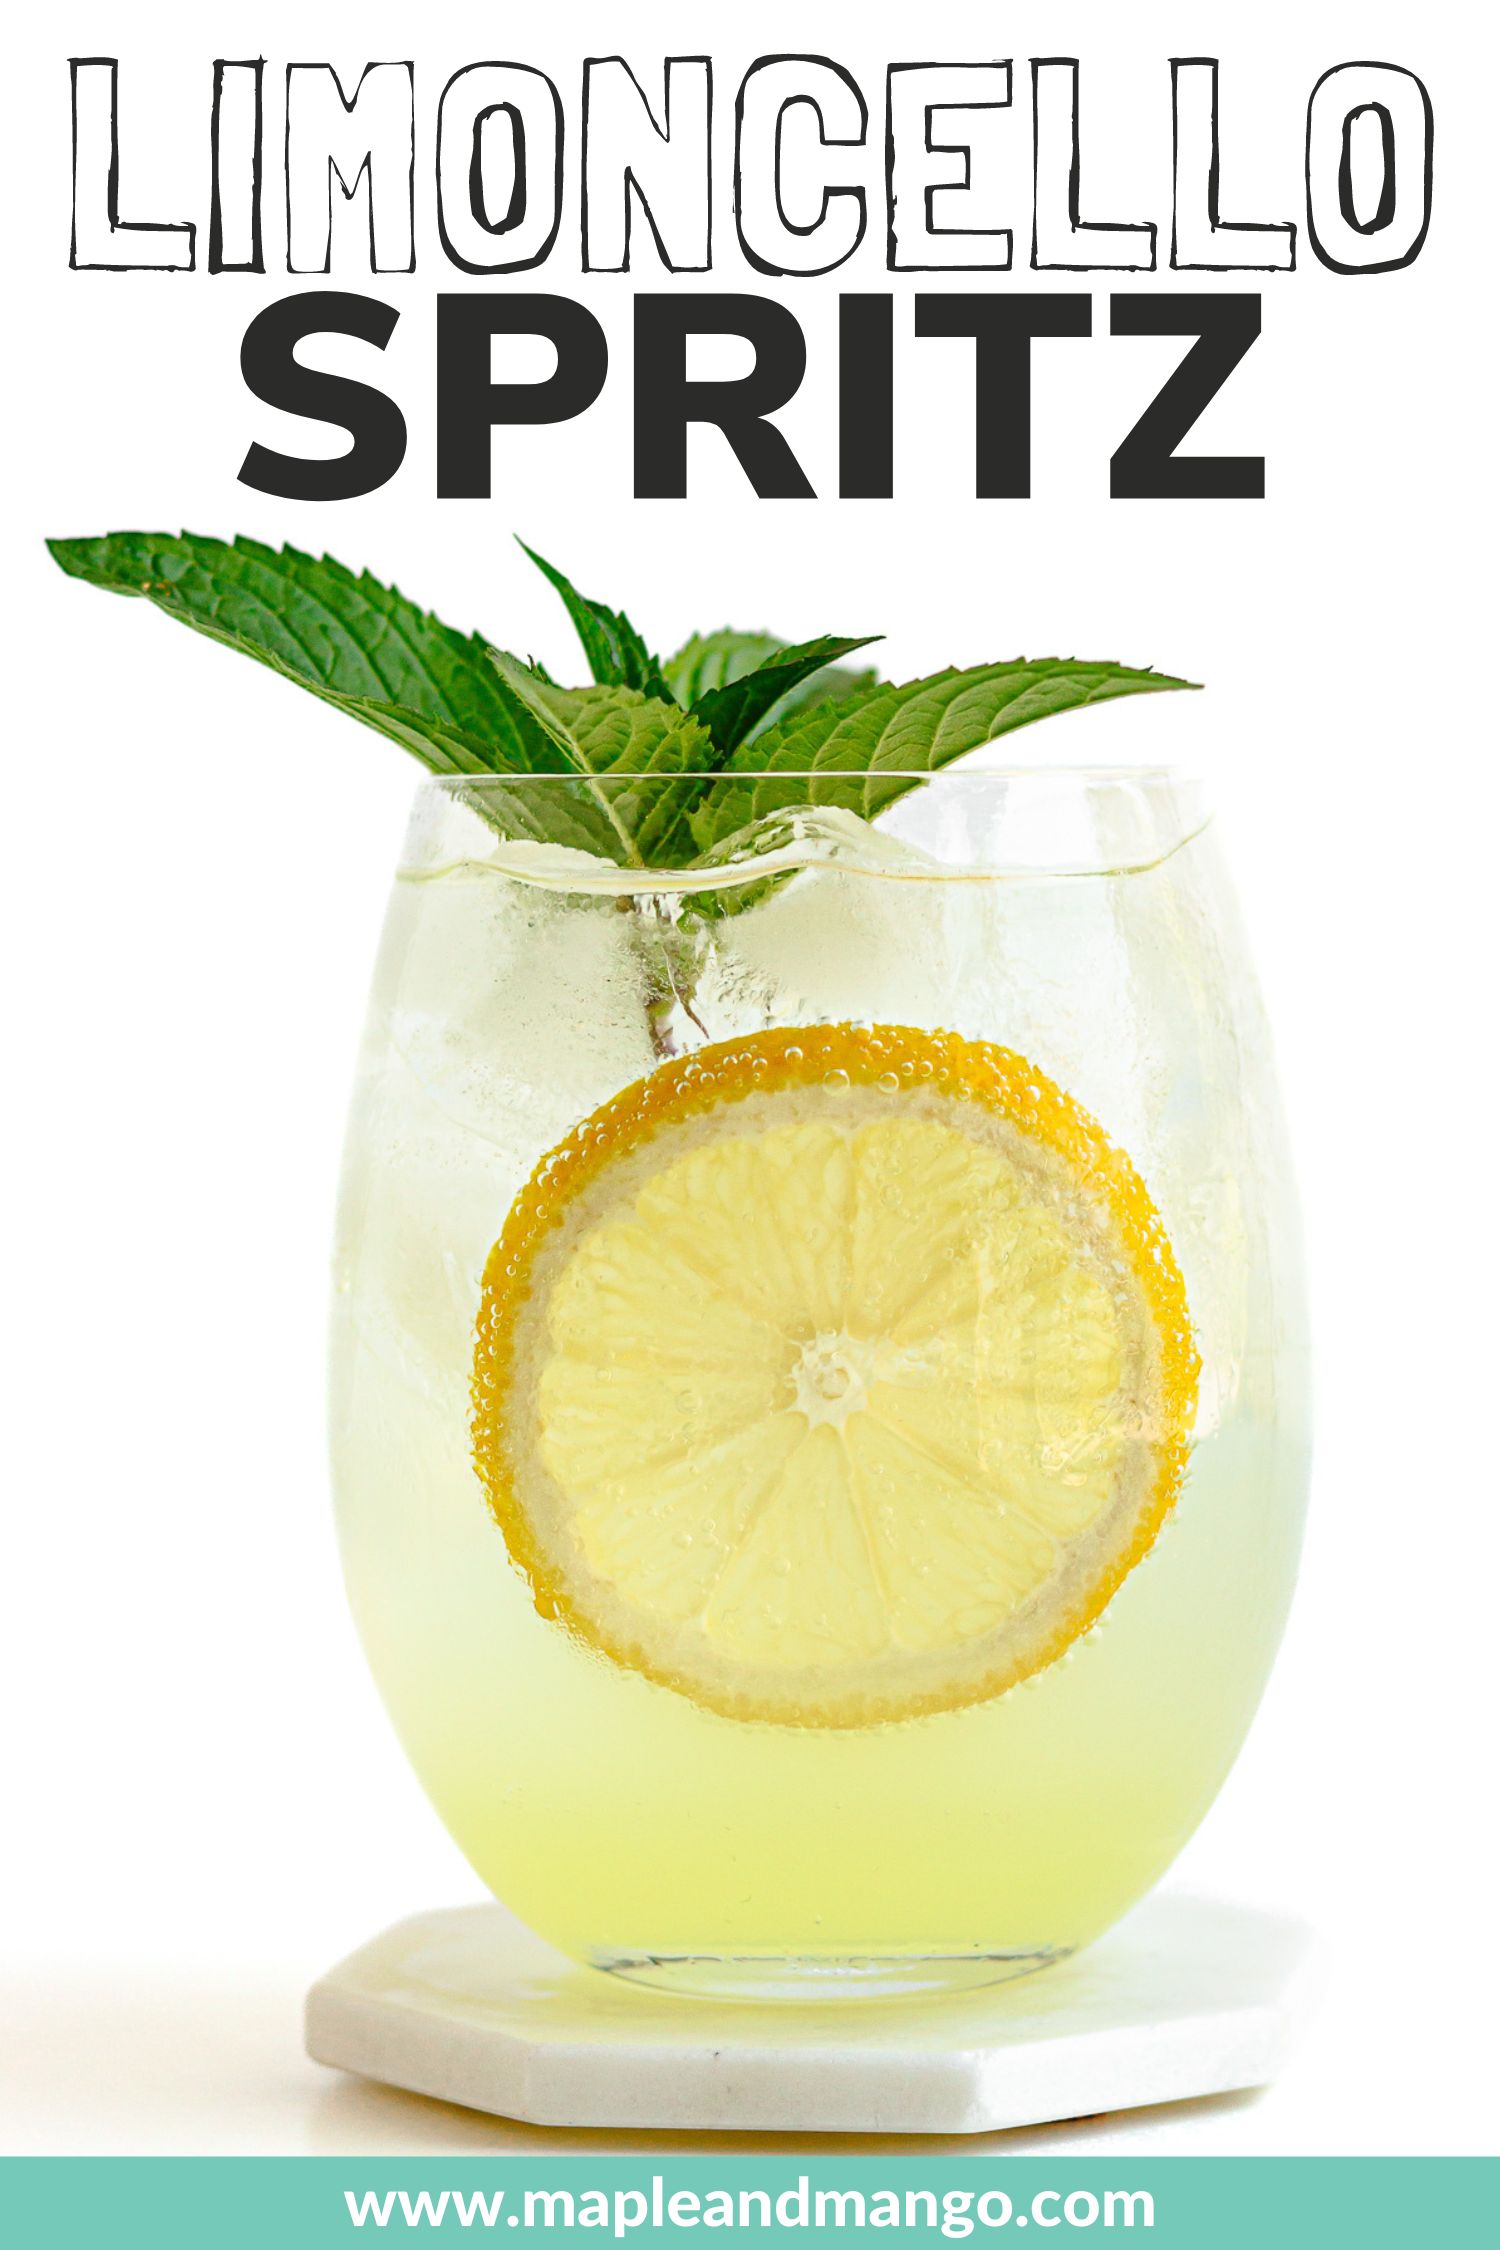 Pinterest graphic featuring a limoncello cocktail with text overlay "Limoncello Spritz".